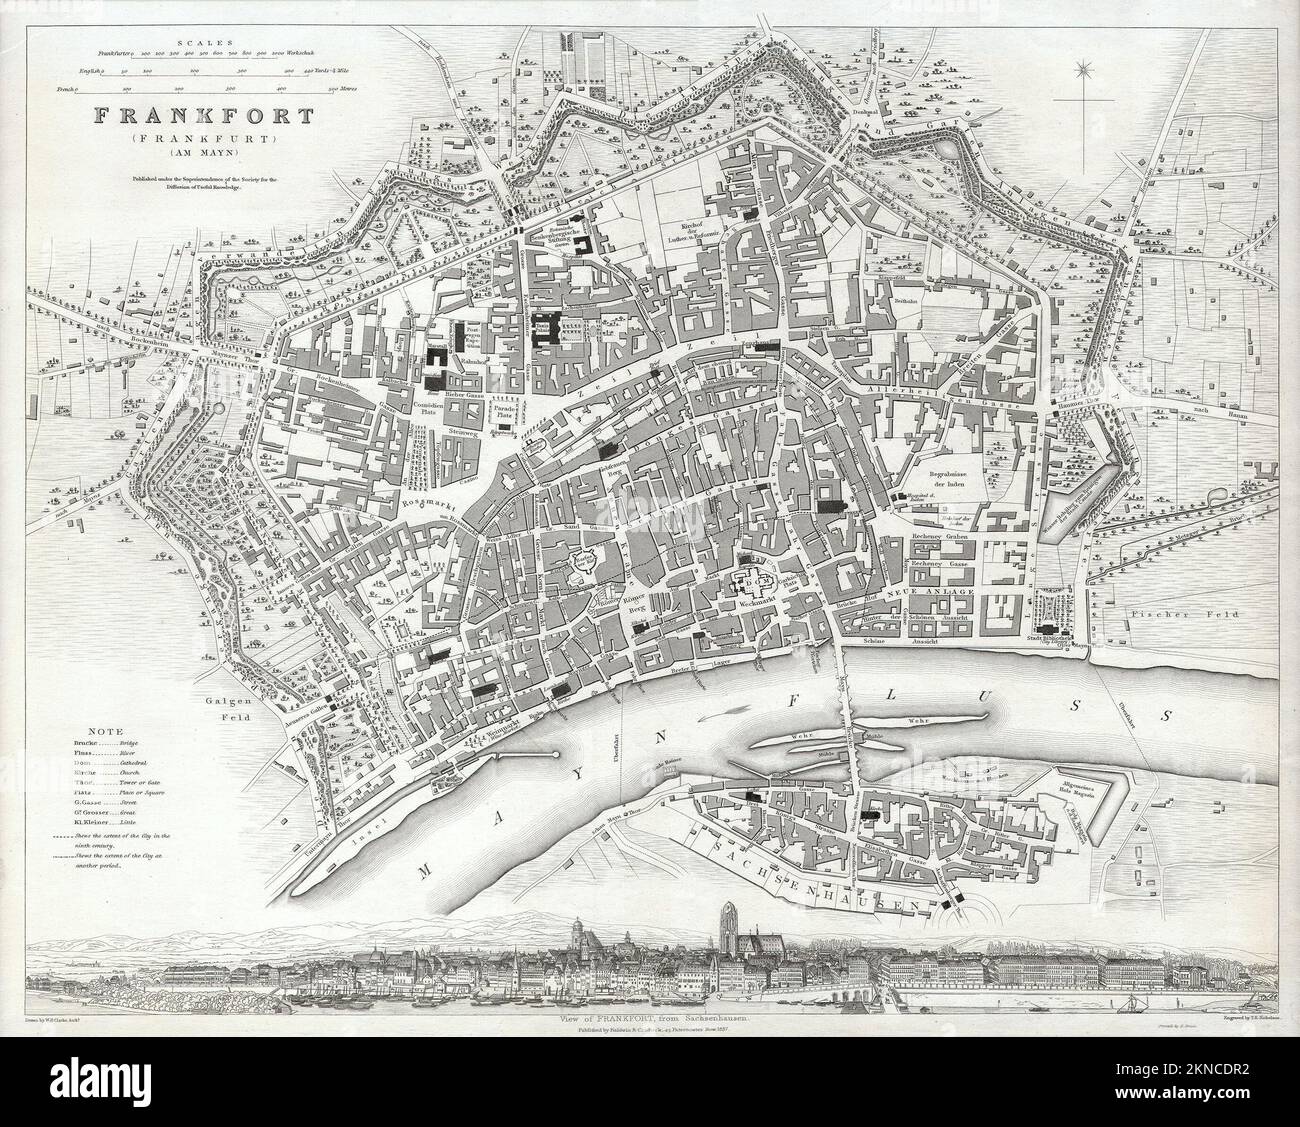 Vintage city plan of Frankfurt and area around it from 19th century. Maps are beautifully hand illustrated and engraved showing it at the time. Stock Photo